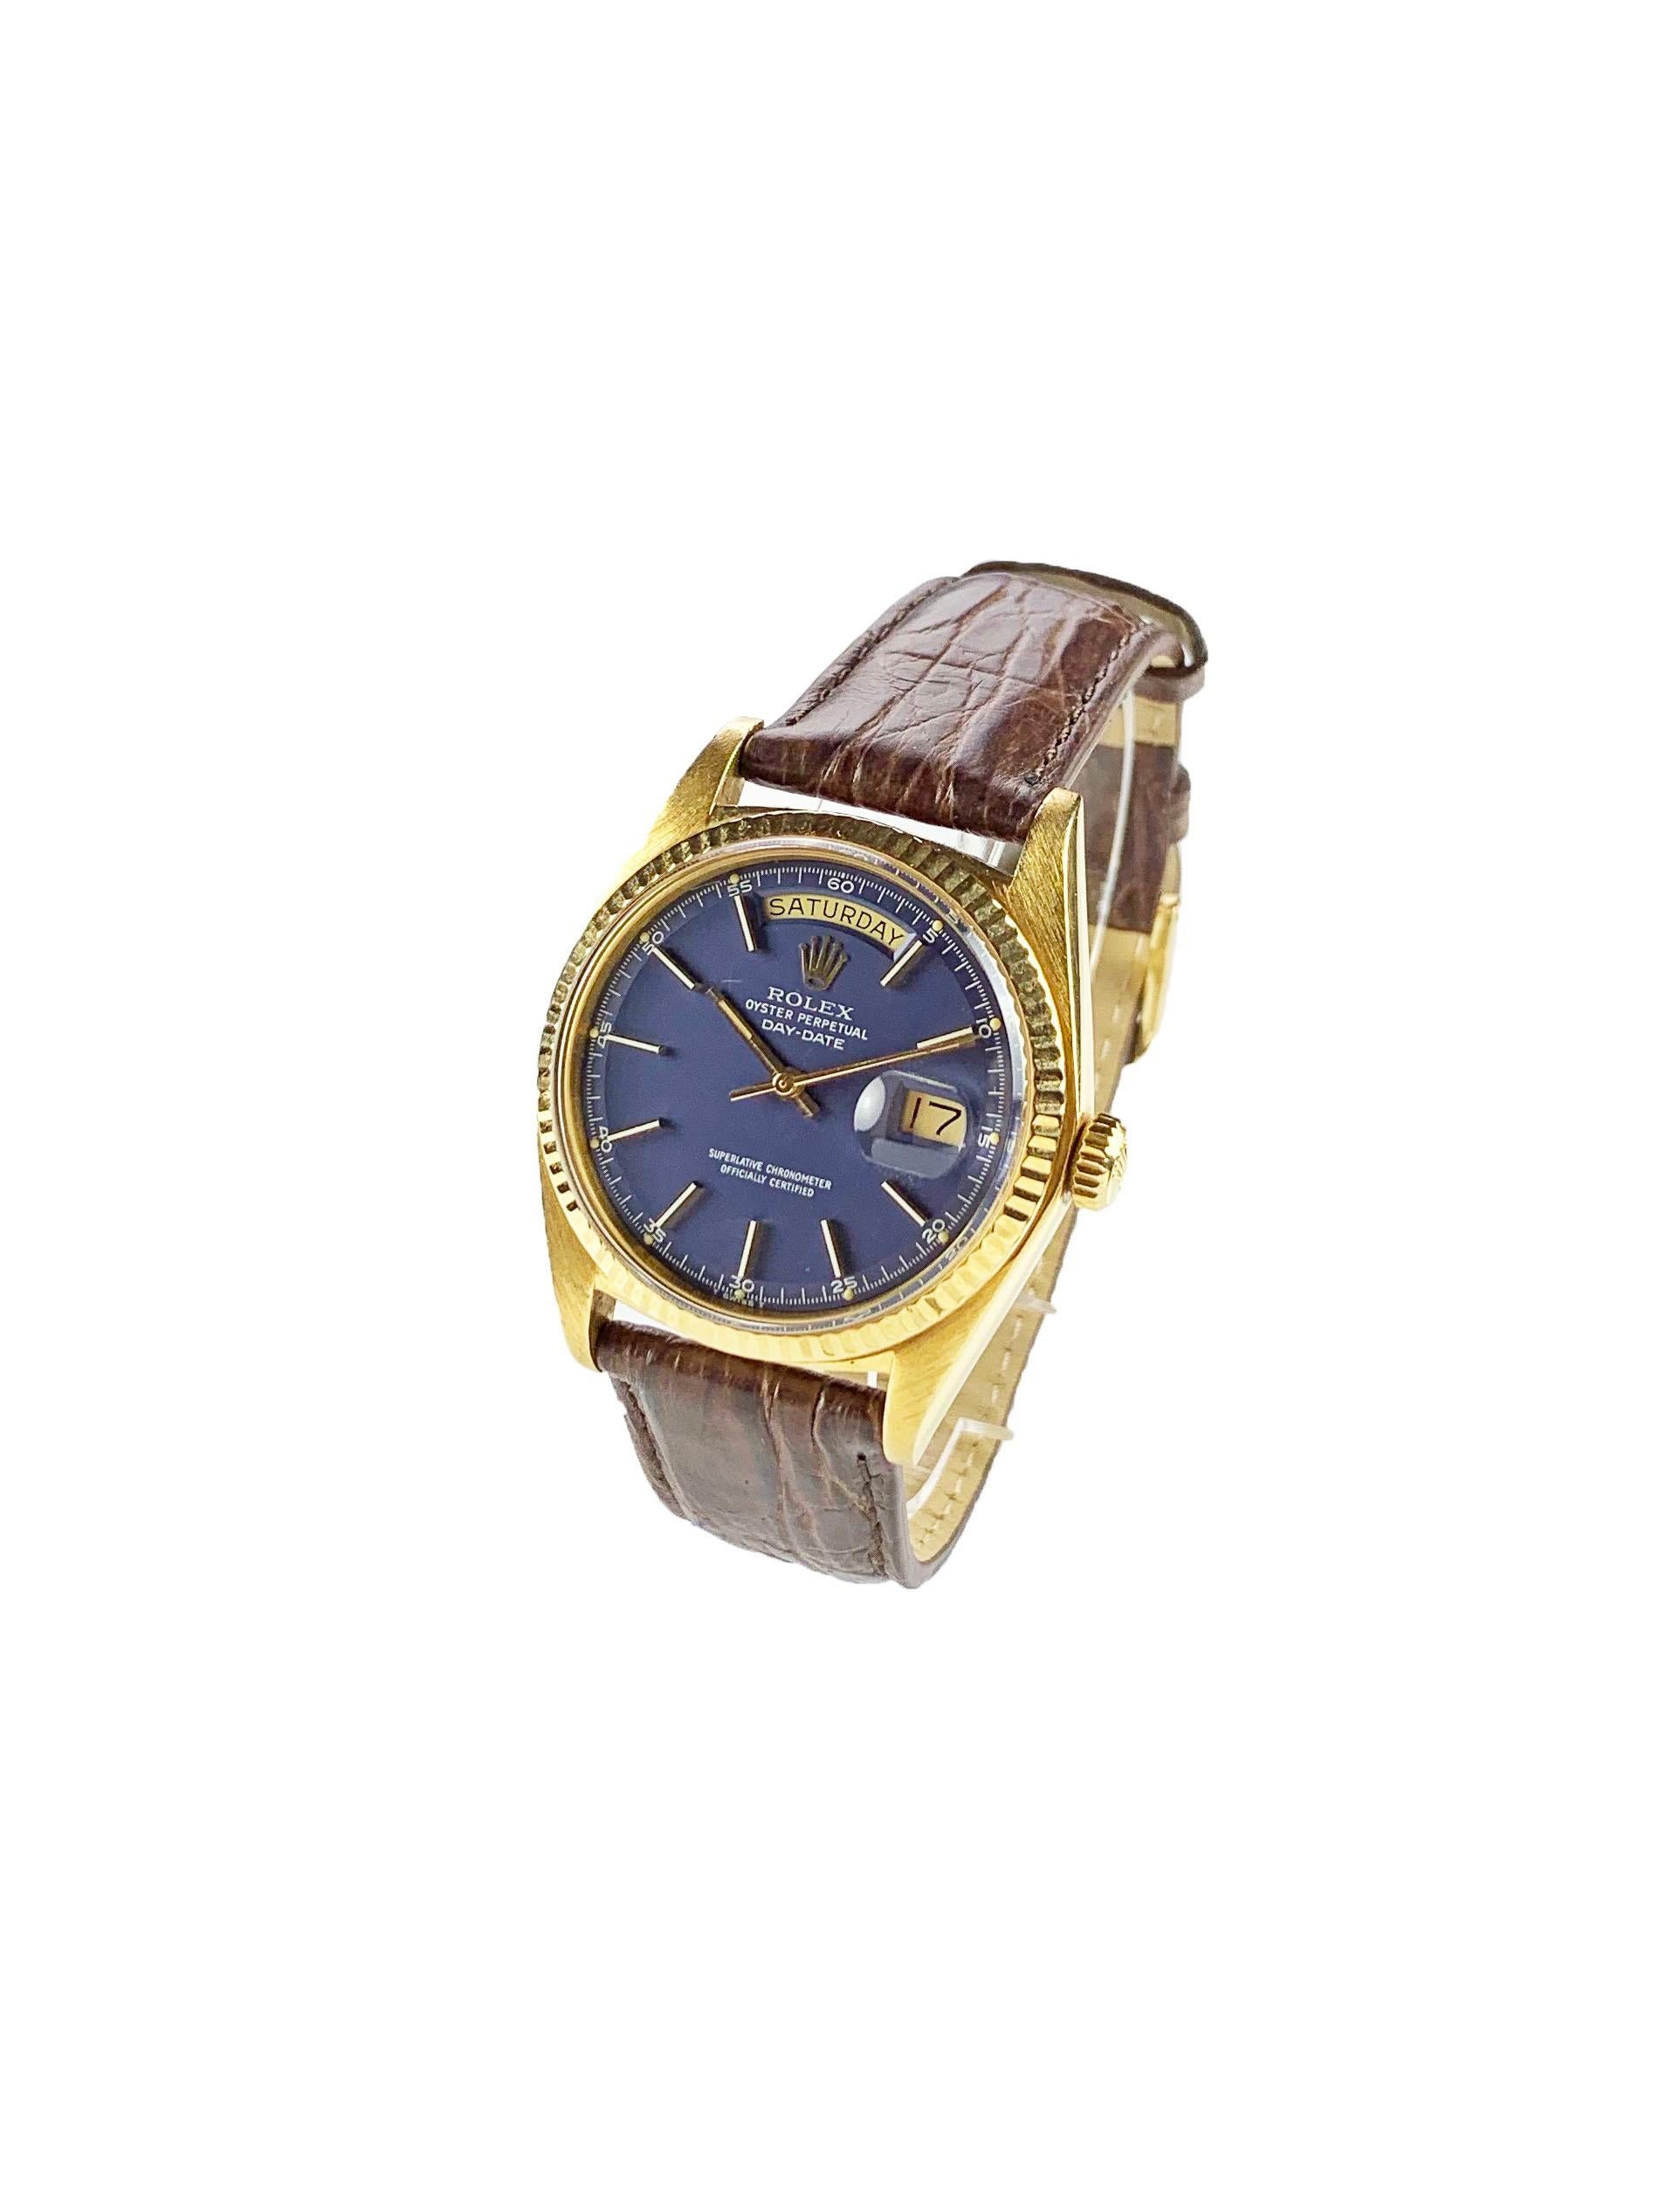 Rolex 18K Yellow Gold Day-Date Presidential Watch from the Early 1970's
Beautiful Factory Blue Minute Track Dial with Quarter Markers and Stunning Luminous Plots.
Yellow Gold Gold Fluted Bezel
18K Yellow Gold Case
36mm in size 
Features Rolex